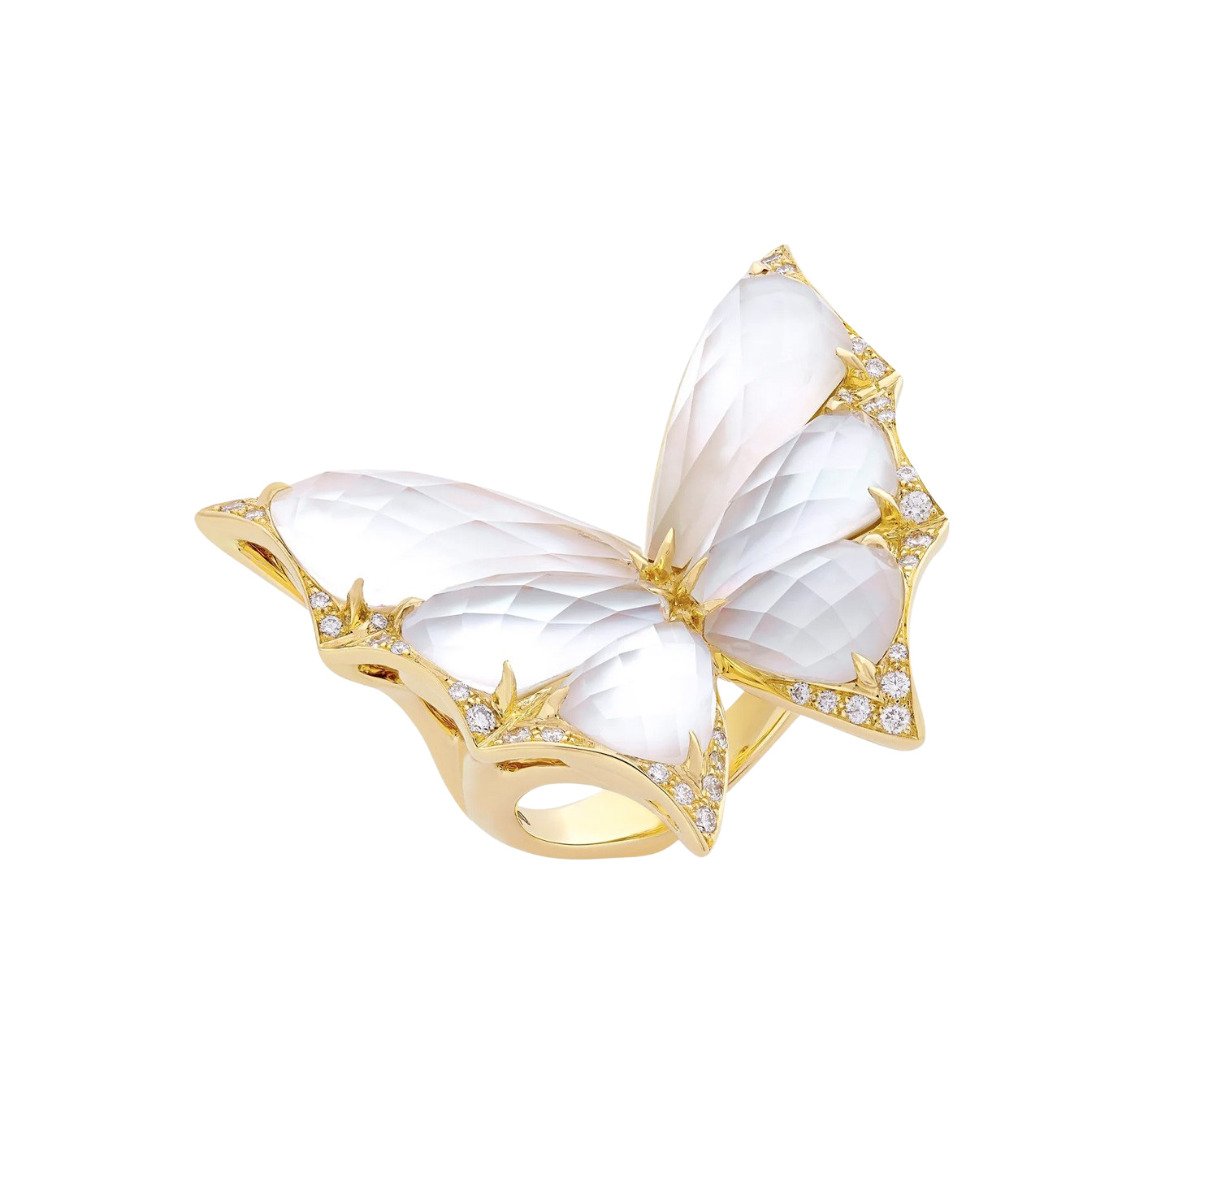 Stephen Webster "Fly By Night" Crystal Haze Large Cocktail Ring